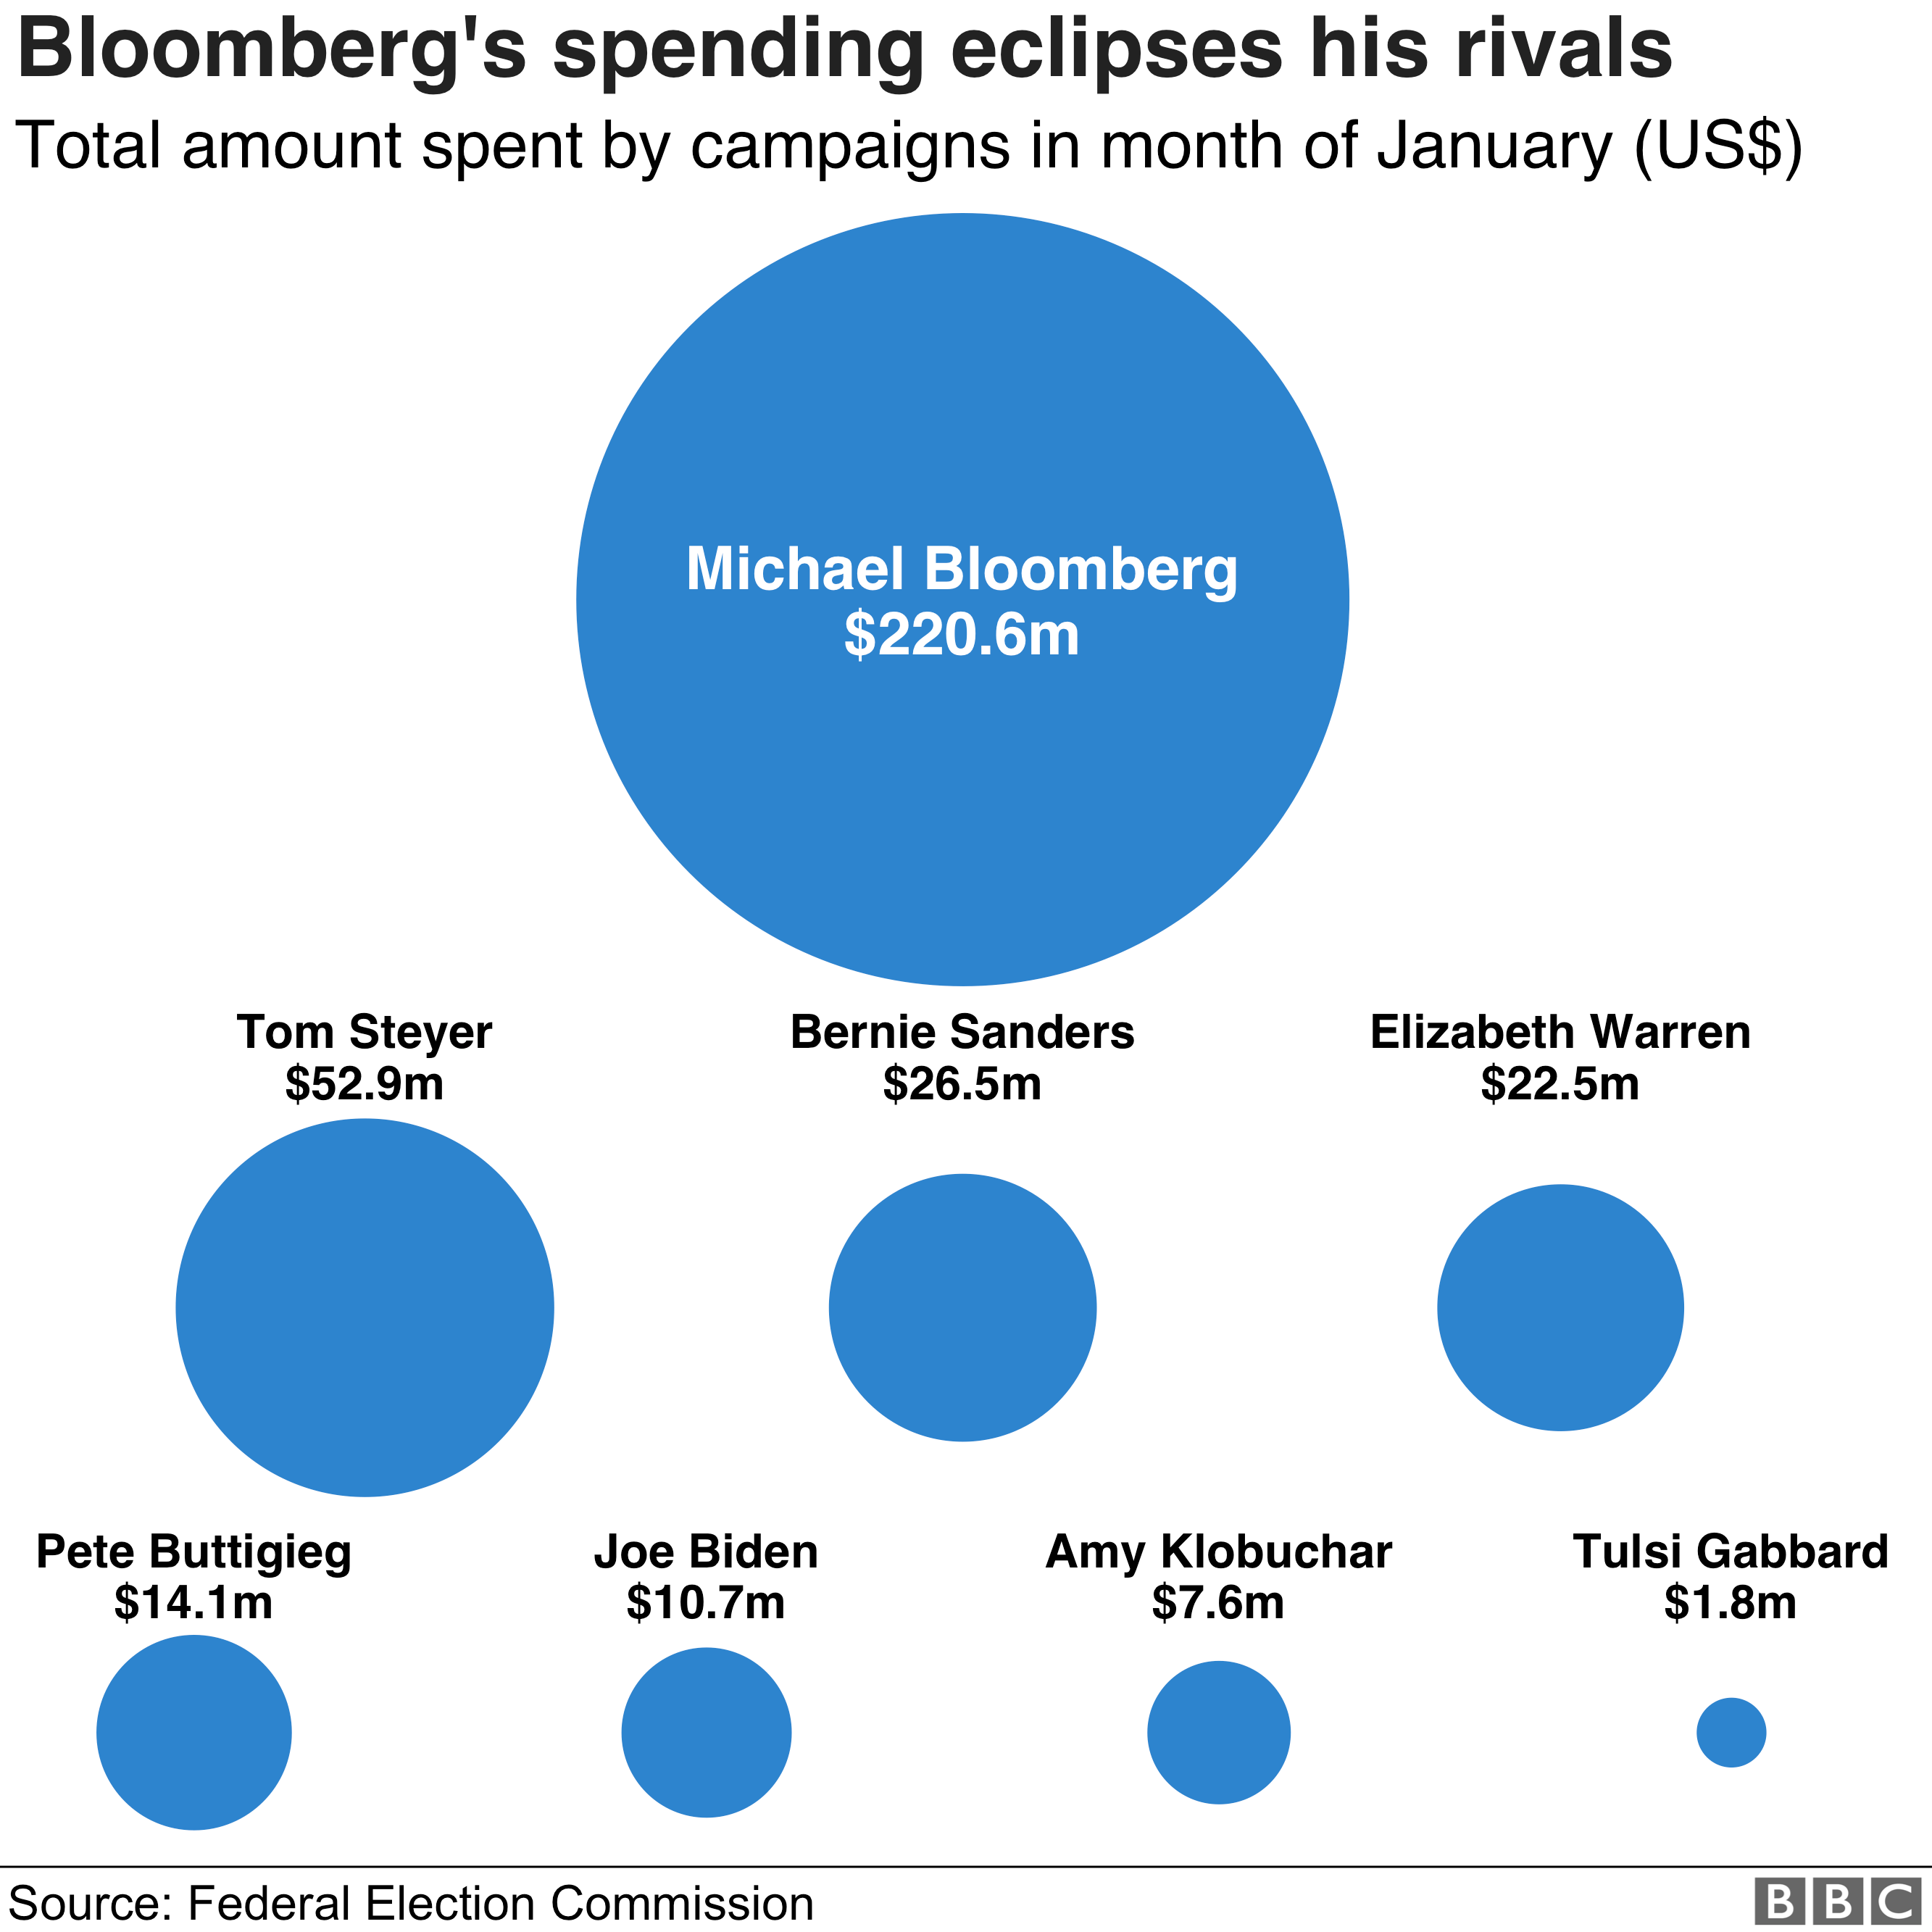 Chart showing the total amount spent by each campaign in January